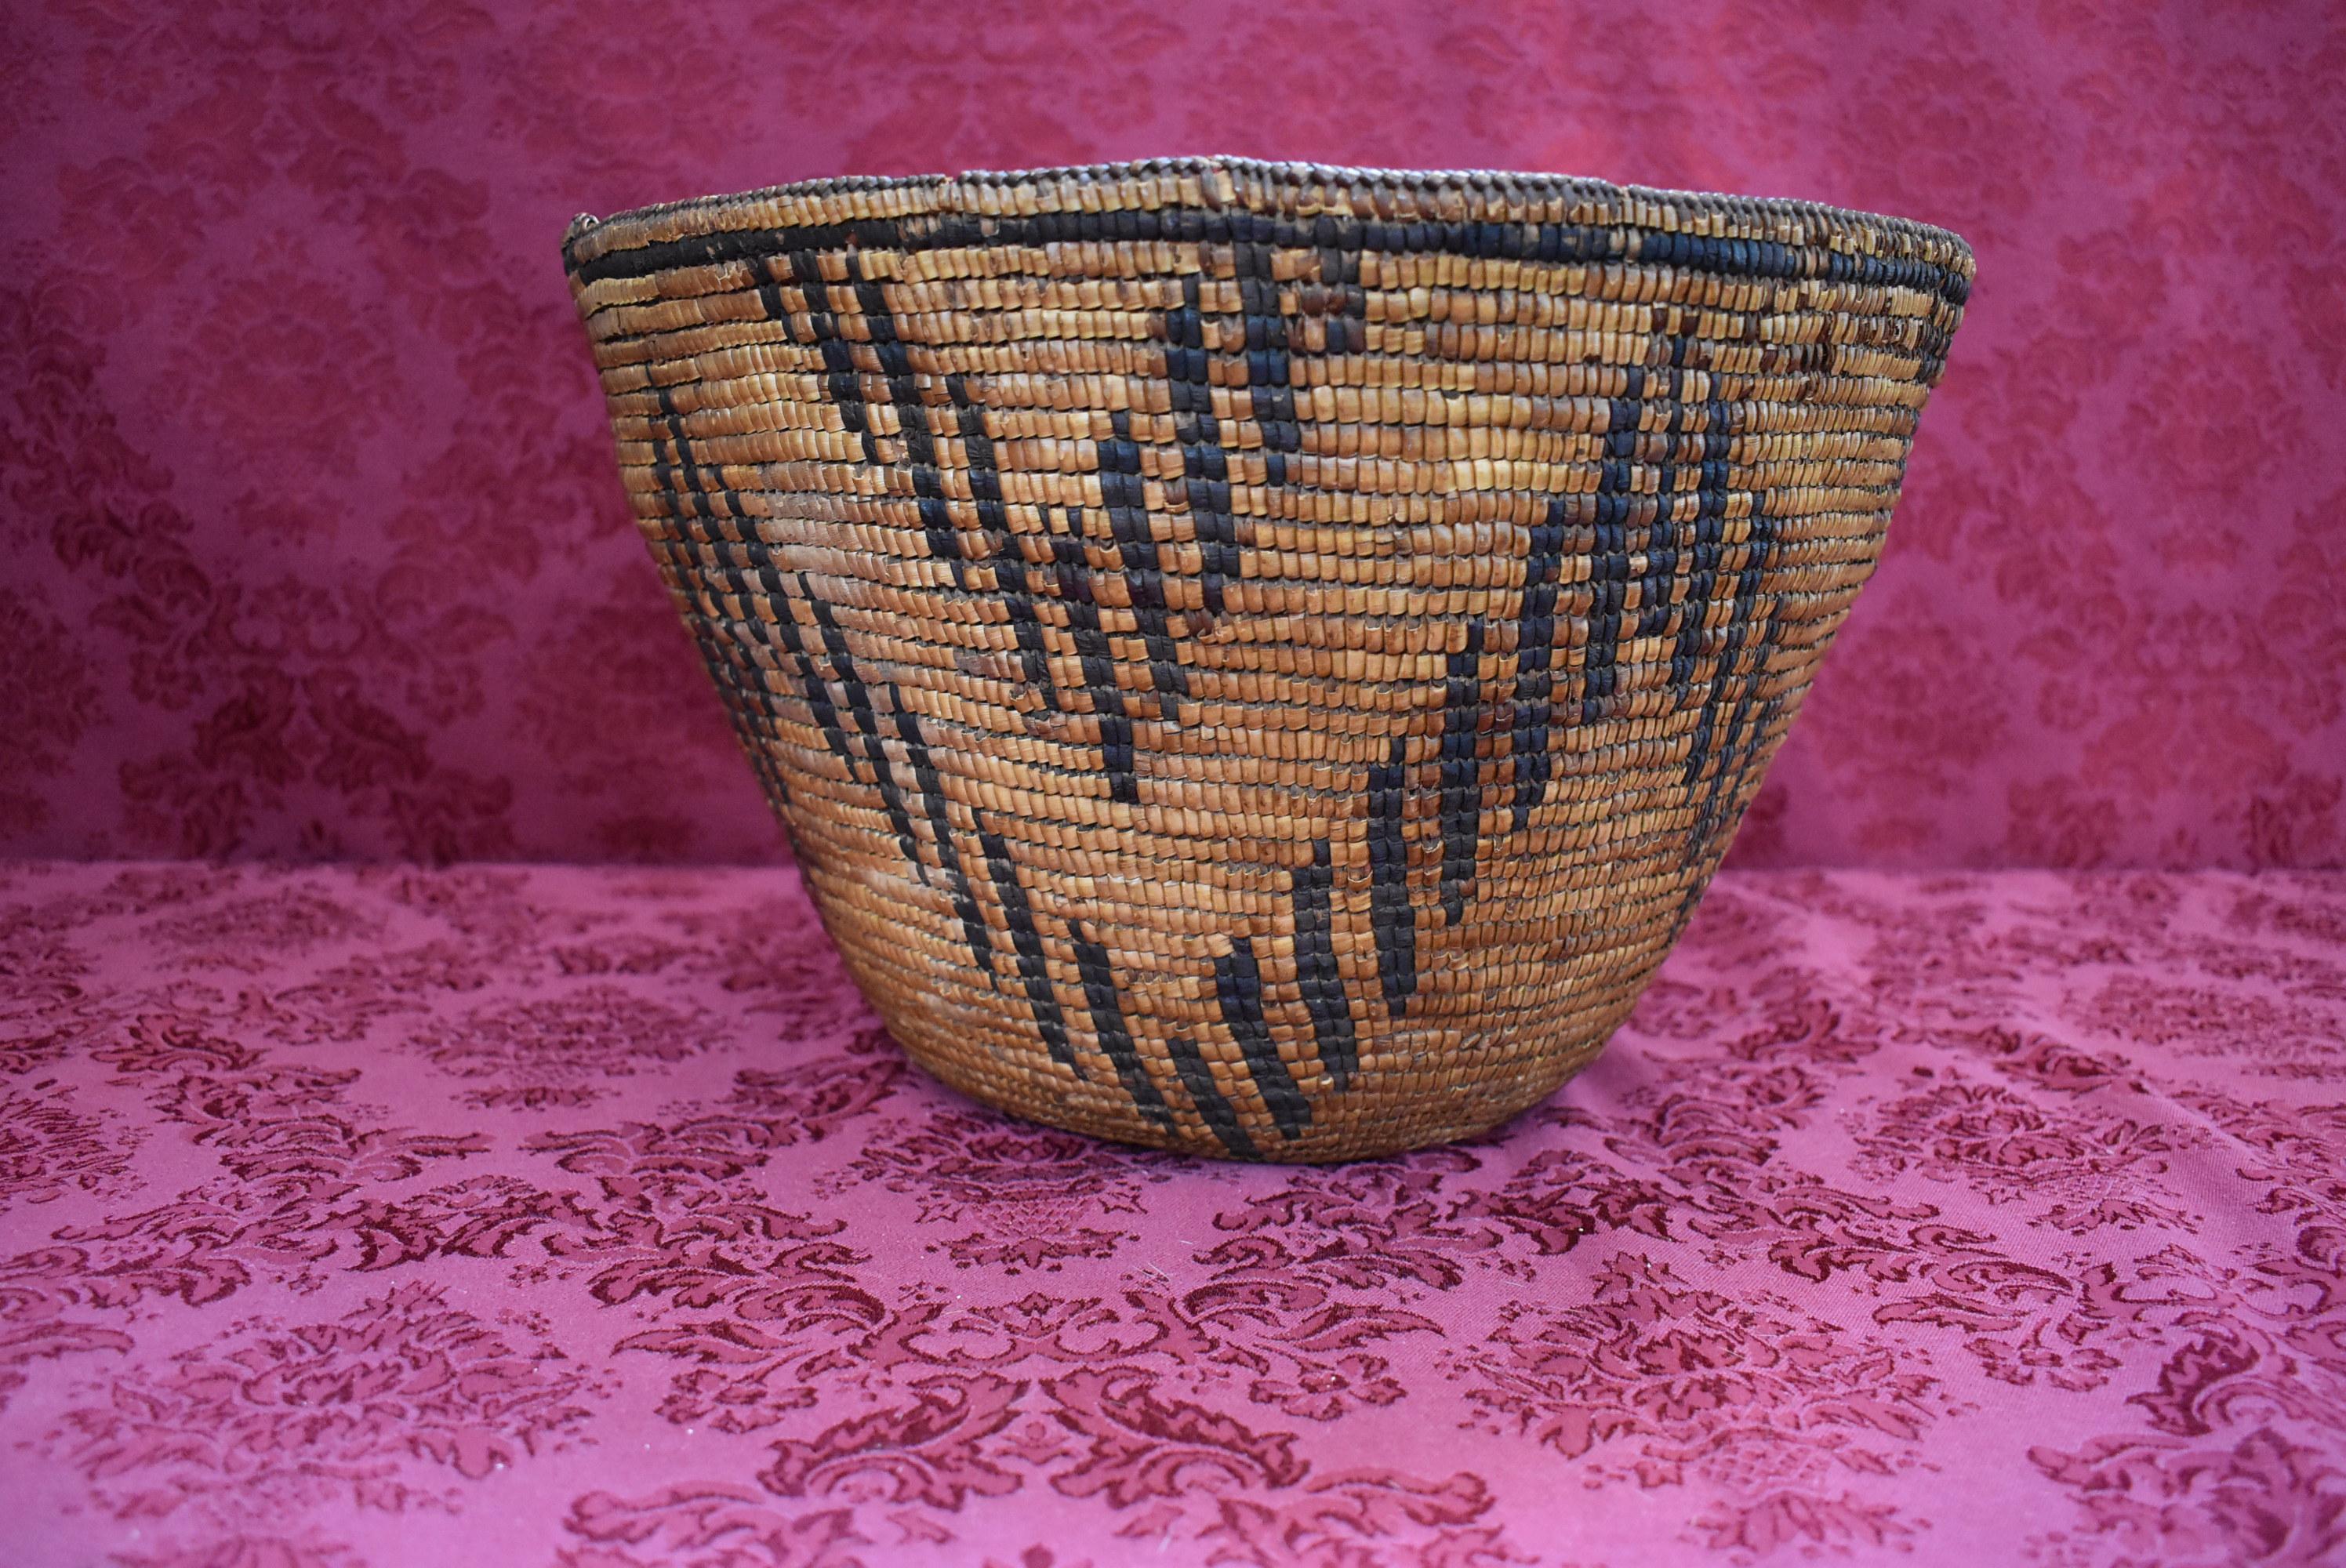 EXTREME EARLY ORIGINAL NATIVE AMERICAN BASKET!